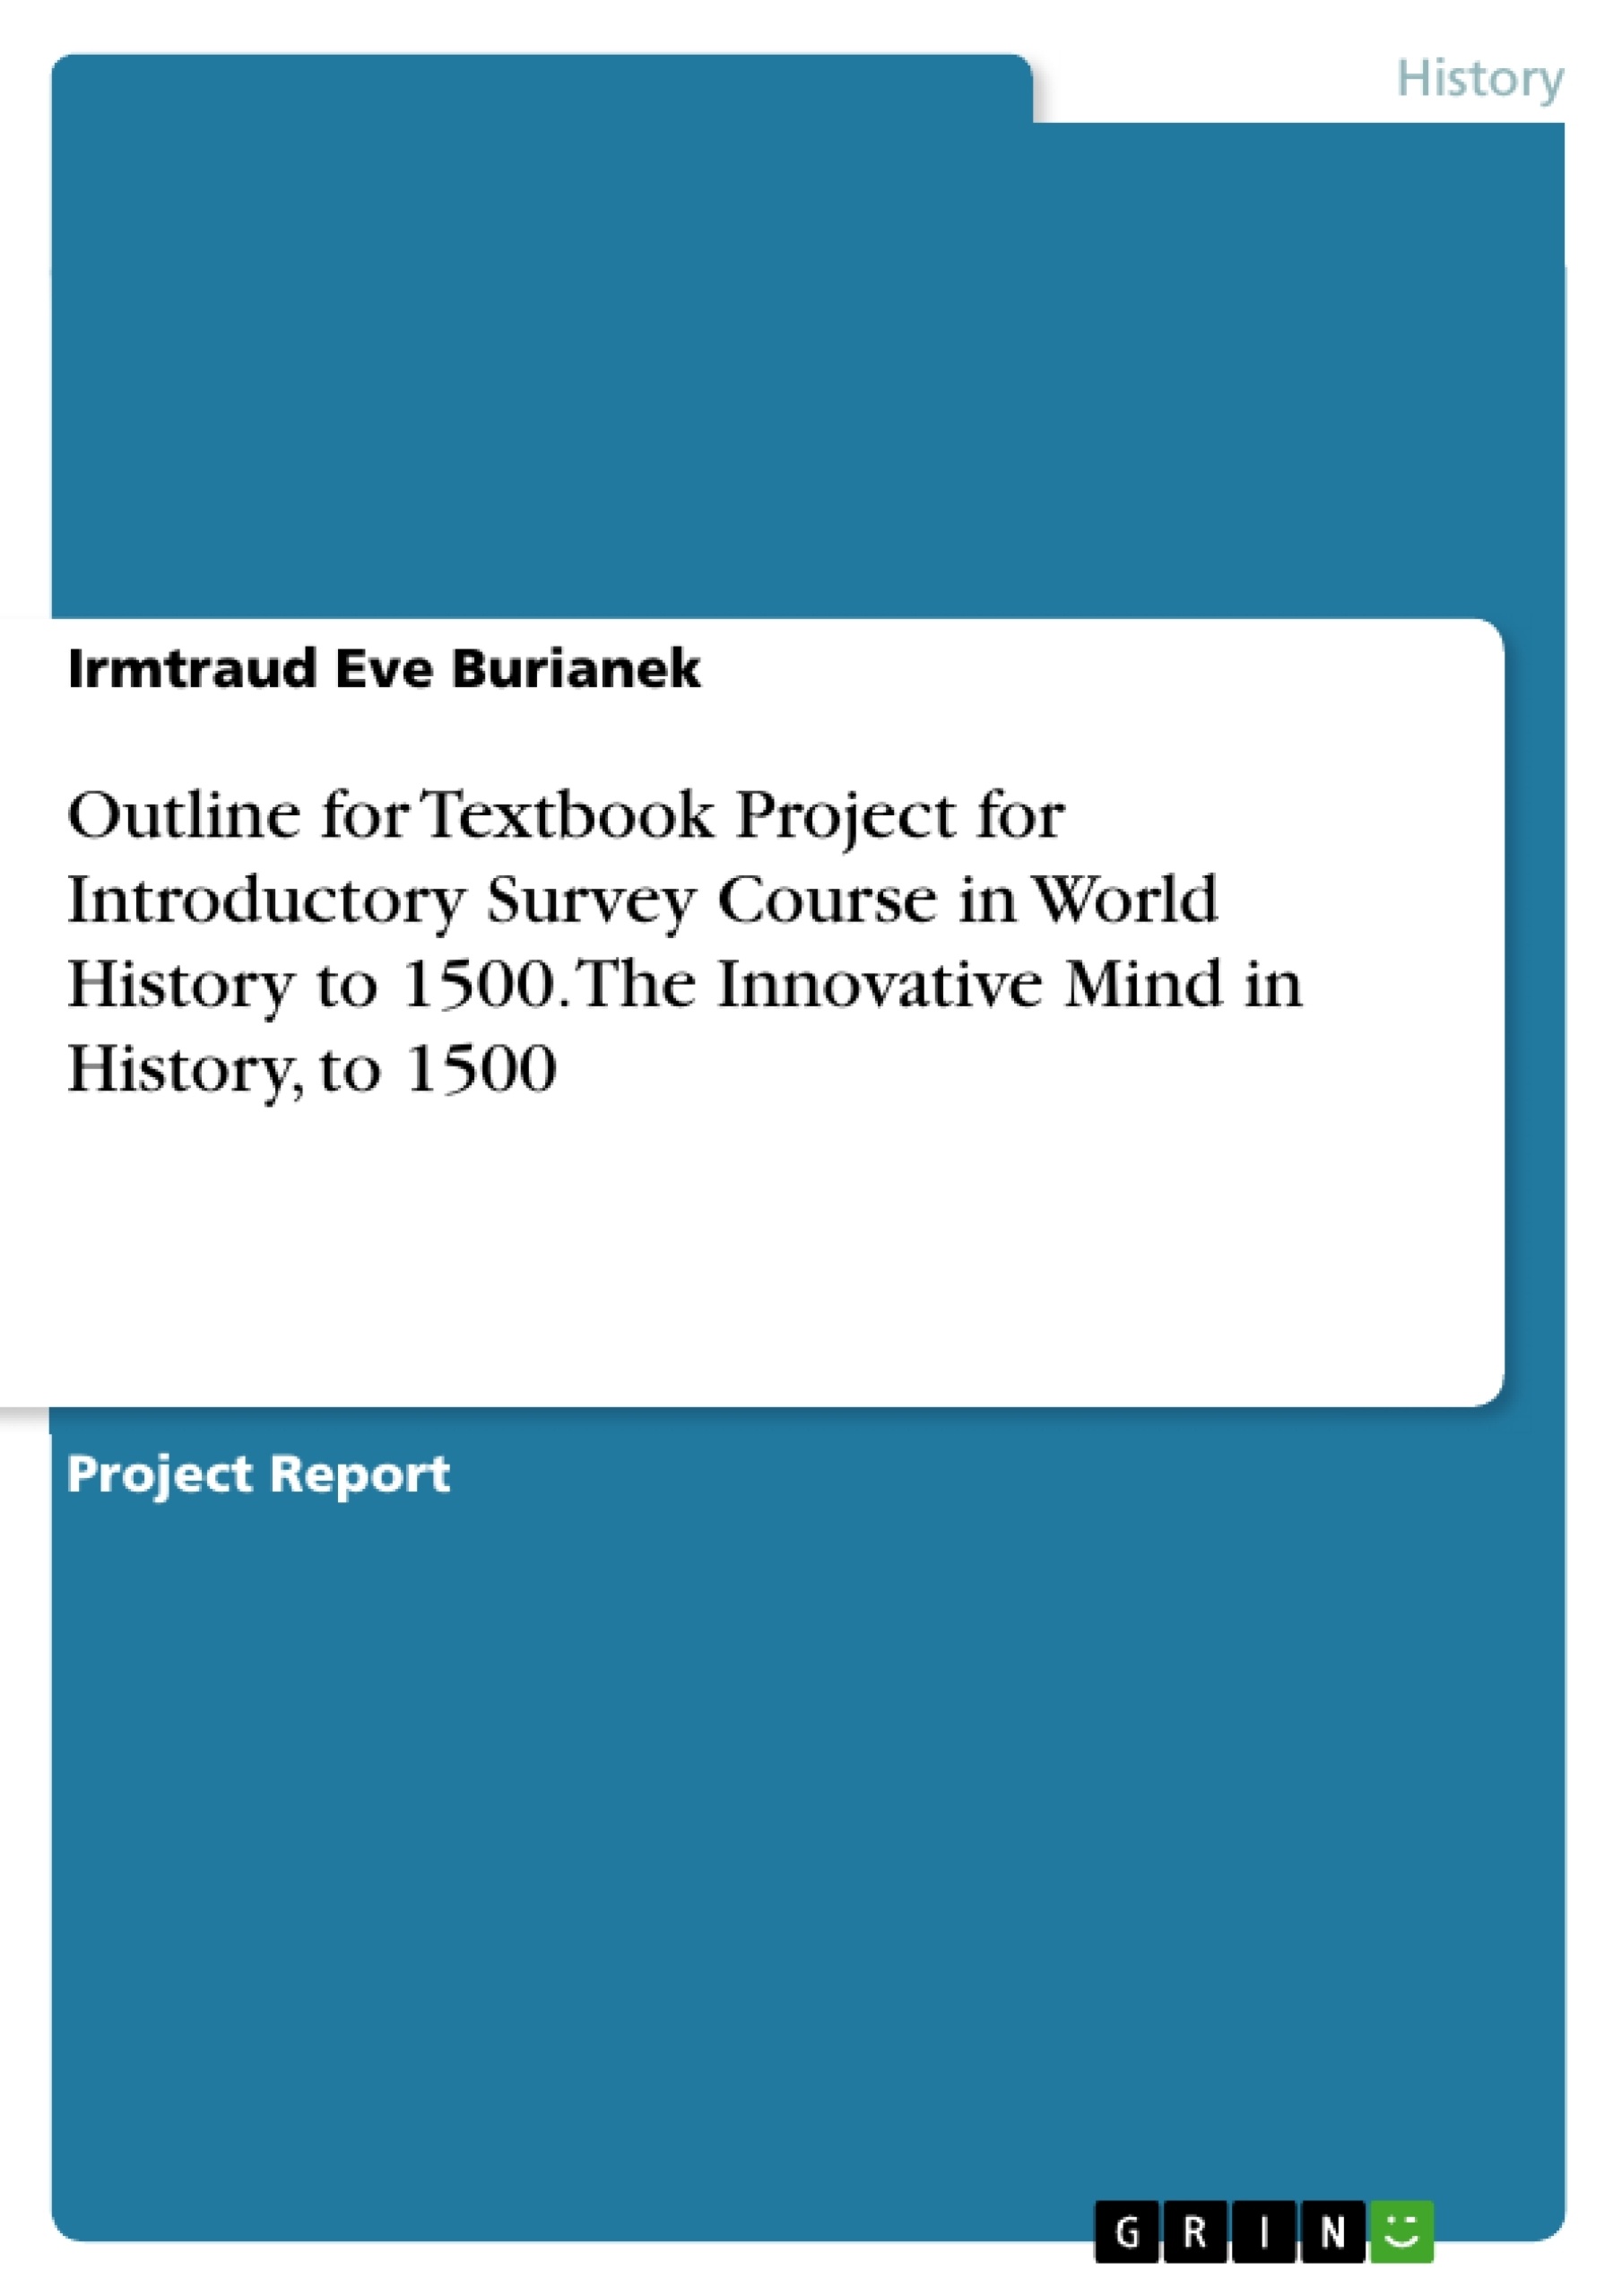 Título: Outline for Textbook Project for Introductory Survey Course in World History to 1500. The Innovative Mind in History, to 1500